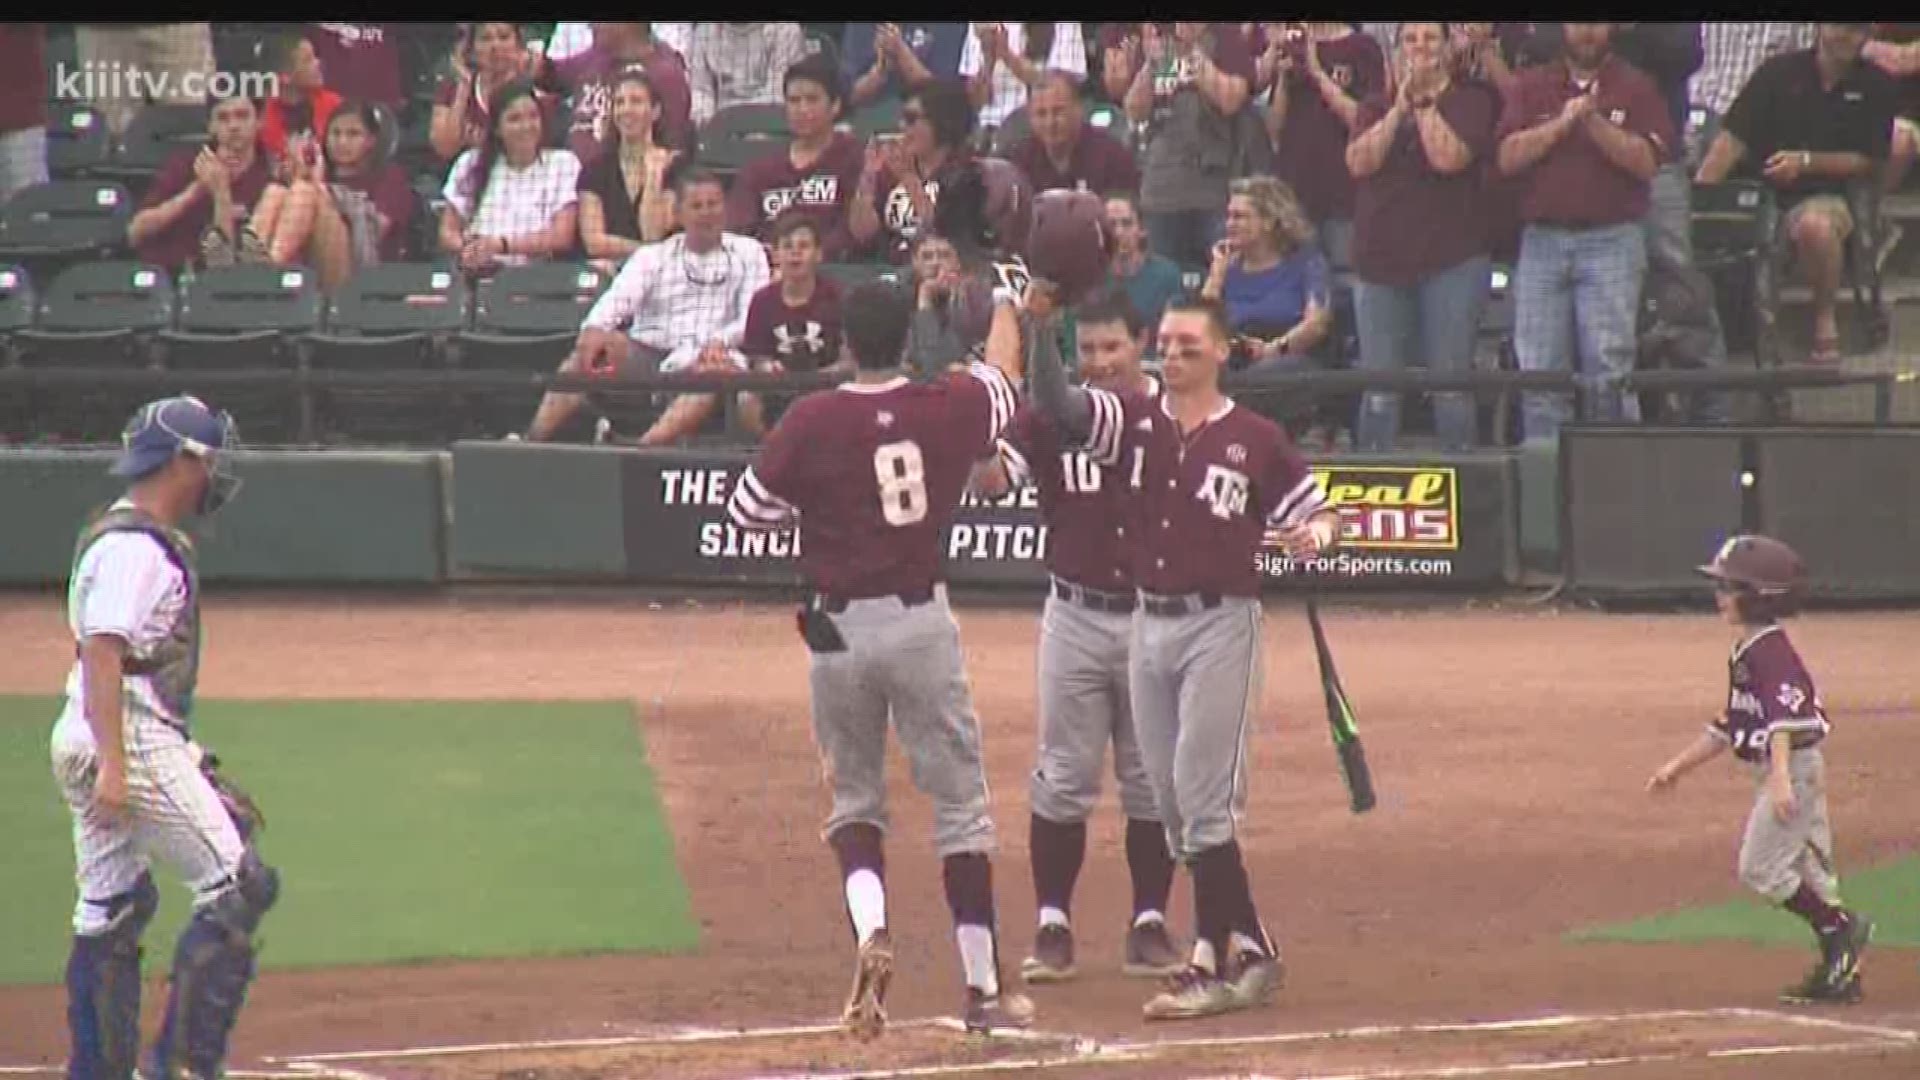 Texas A&M knocked off the Islanders in their first ever trip to Whataburger Field.